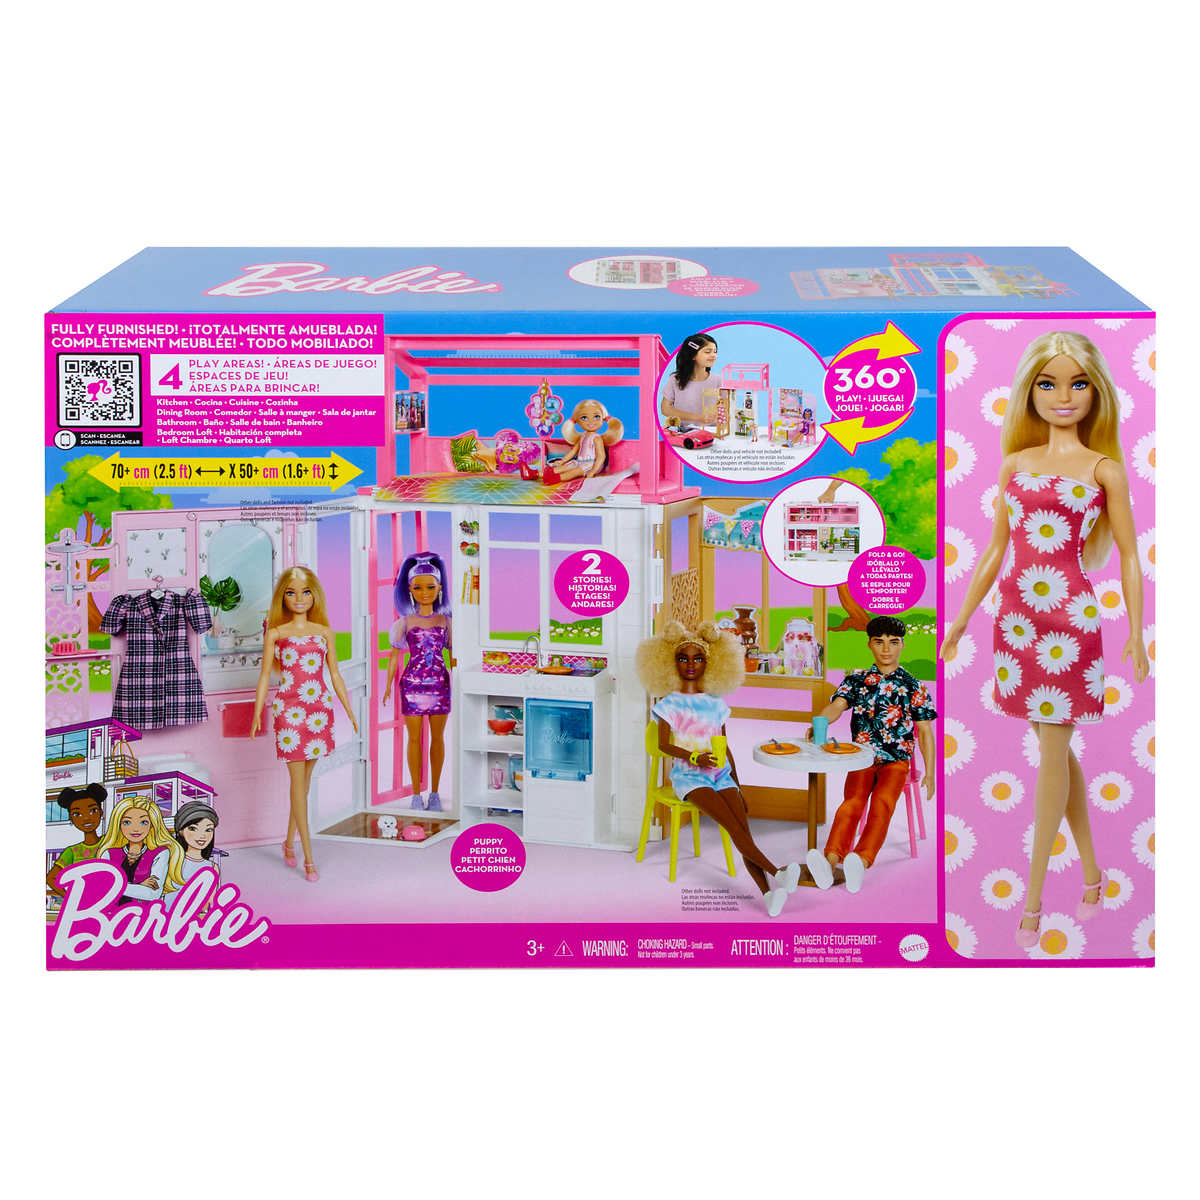 BARBIE - Canada's best deals on Electronics, TVs, Unlocked Cell Phones,  Macbooks, Laptops, Kitchen Appliances, Toys, Bed and Bathroom products,  Heaters, Humidifiers, Hair appliances and so much more